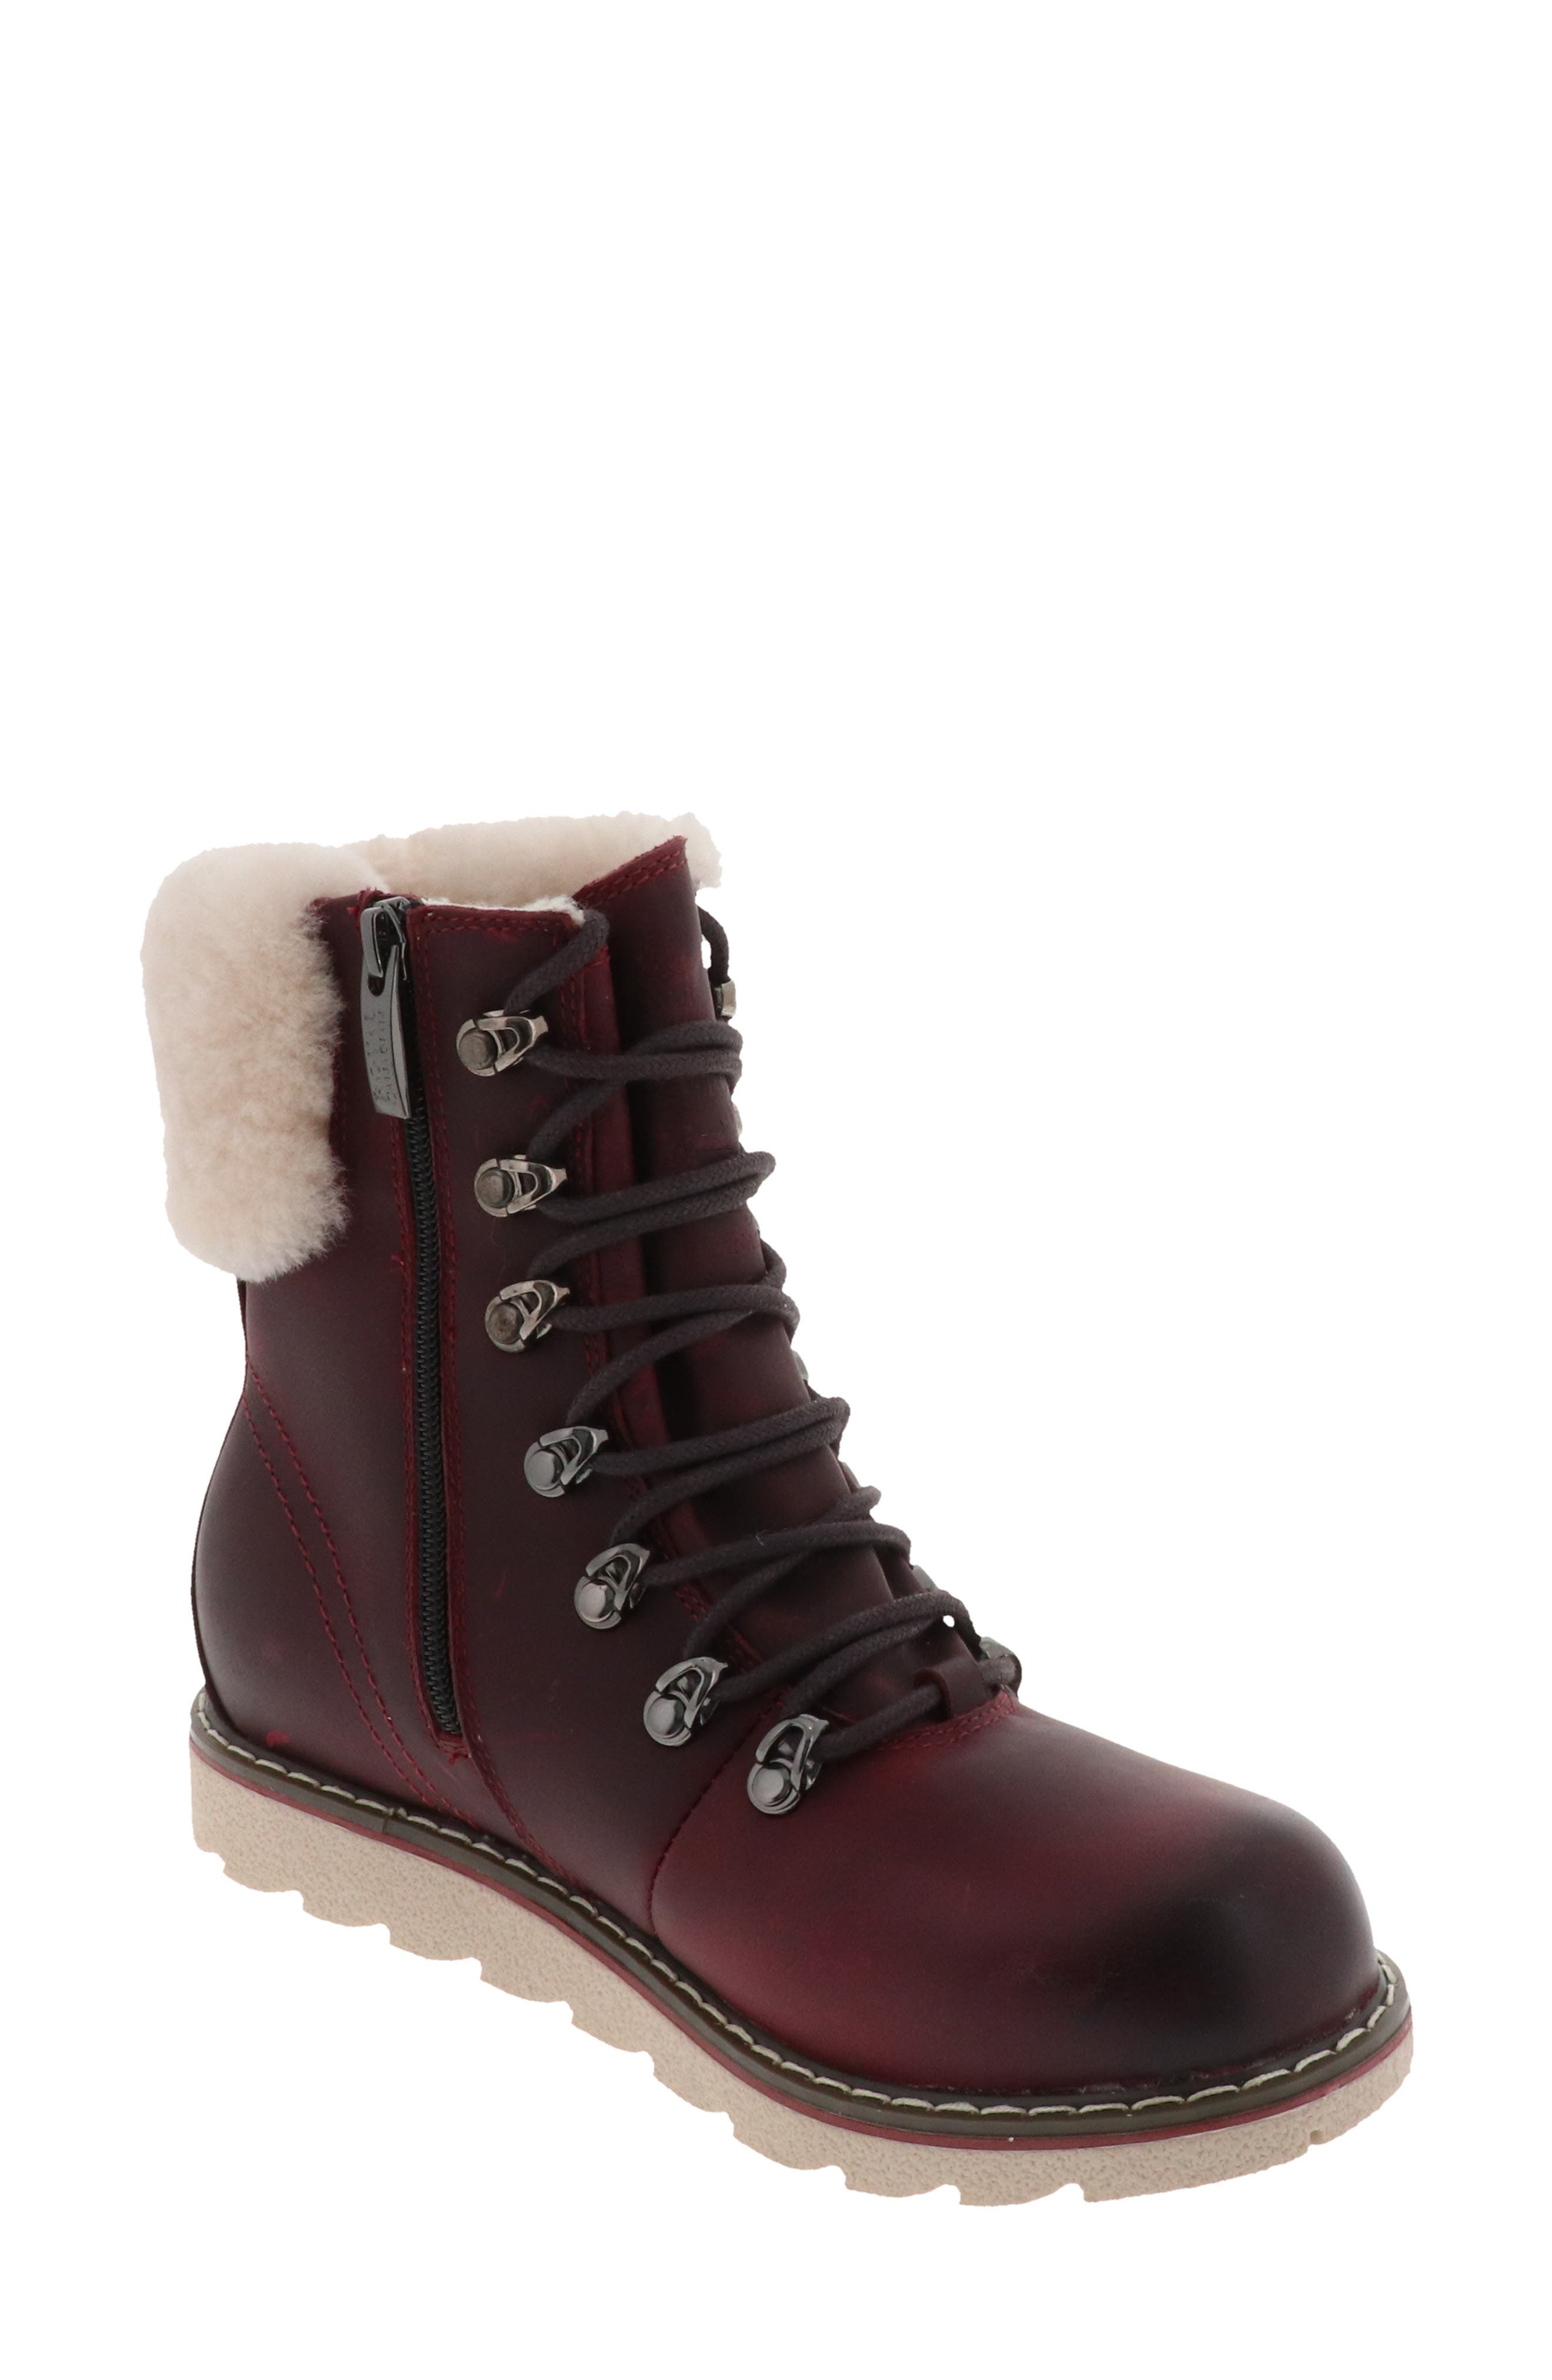 royal canadian winter boots